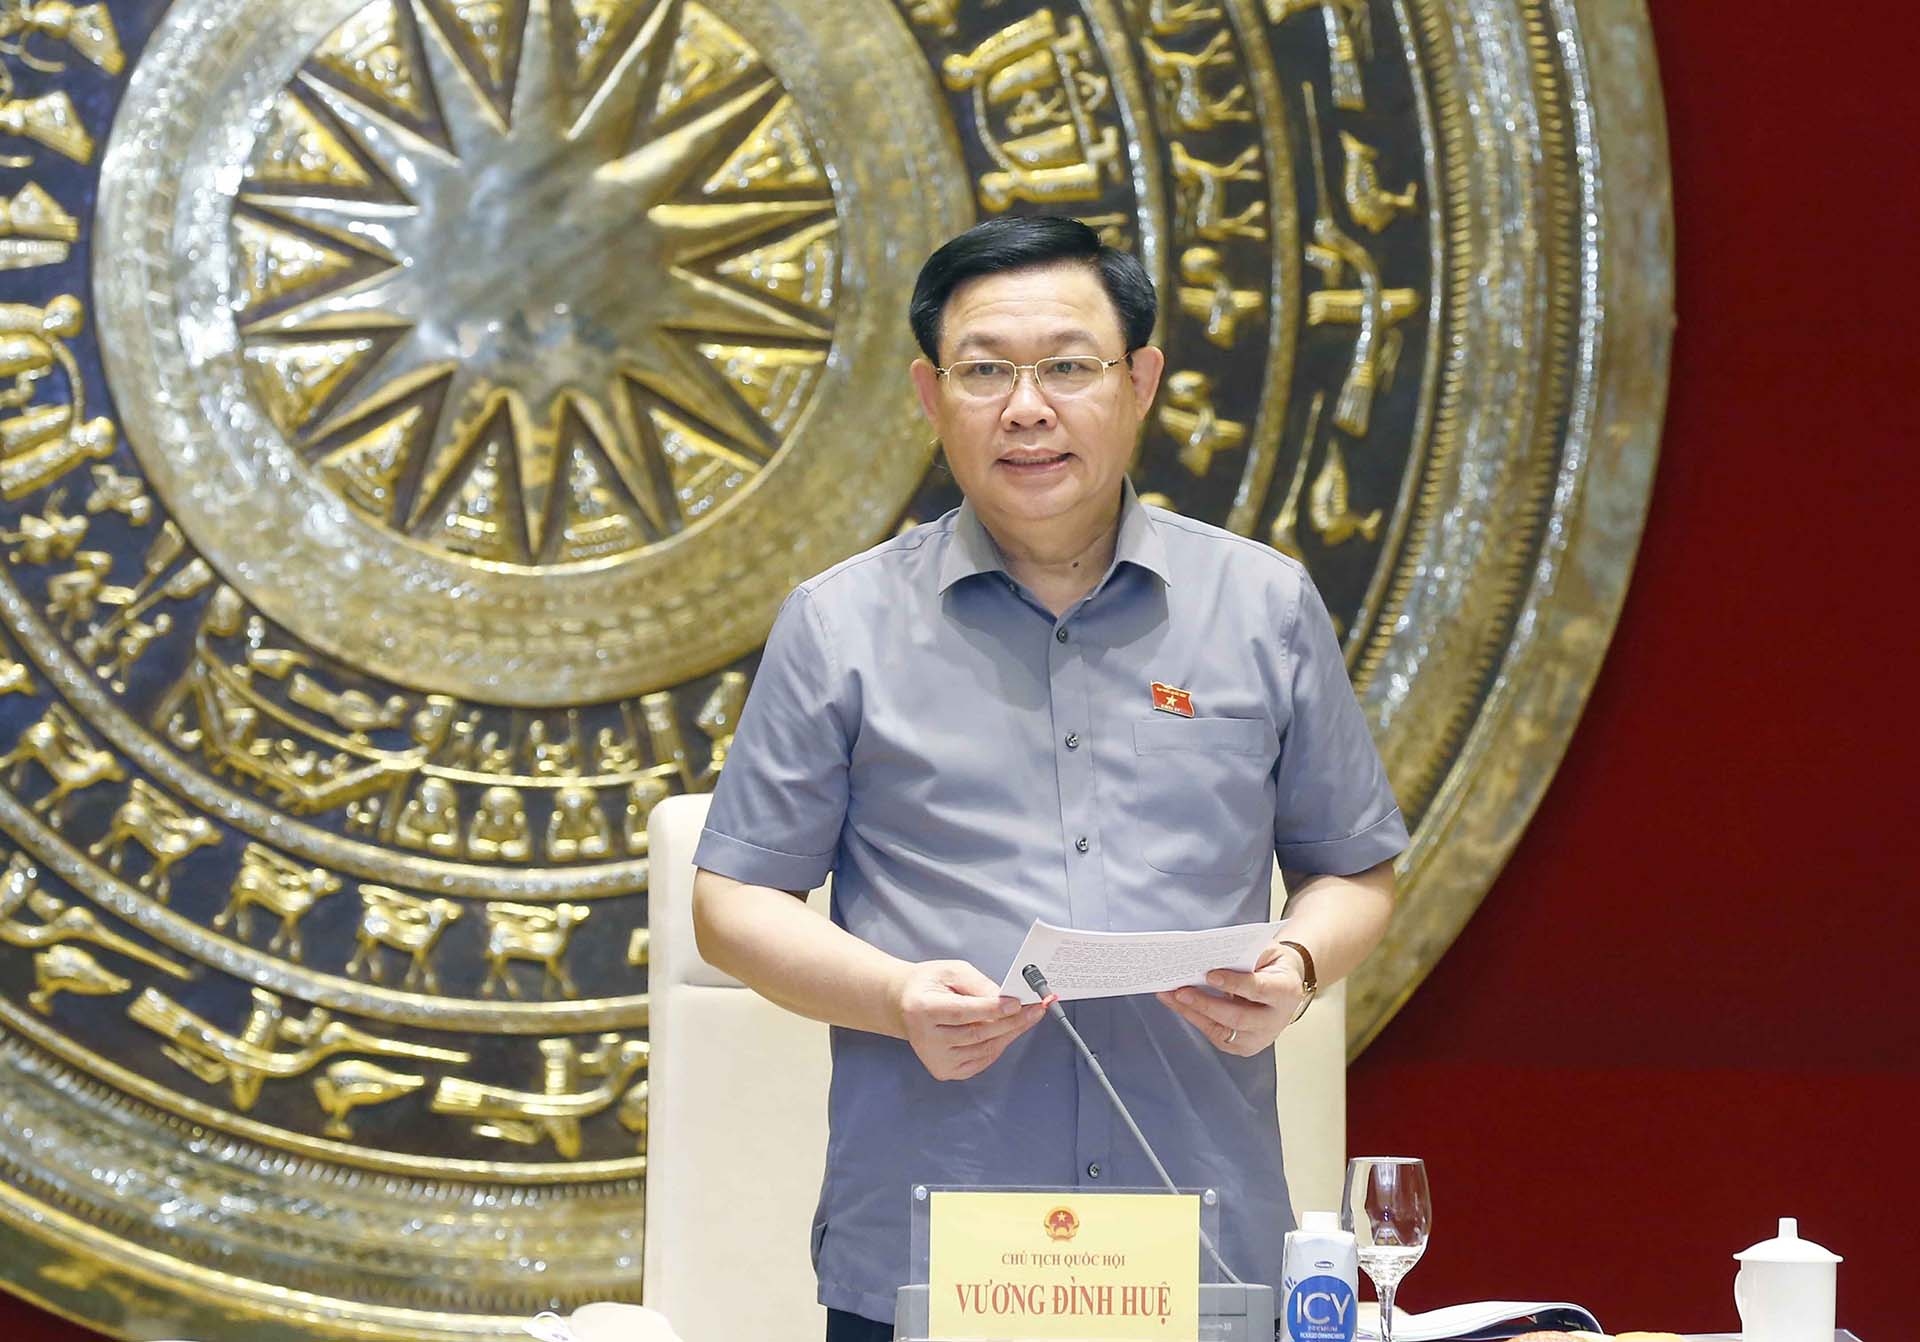 Viet Nam to affirm support for cooperation in COVID-19 fight at 42nd AIPA General Assembly: top legislator